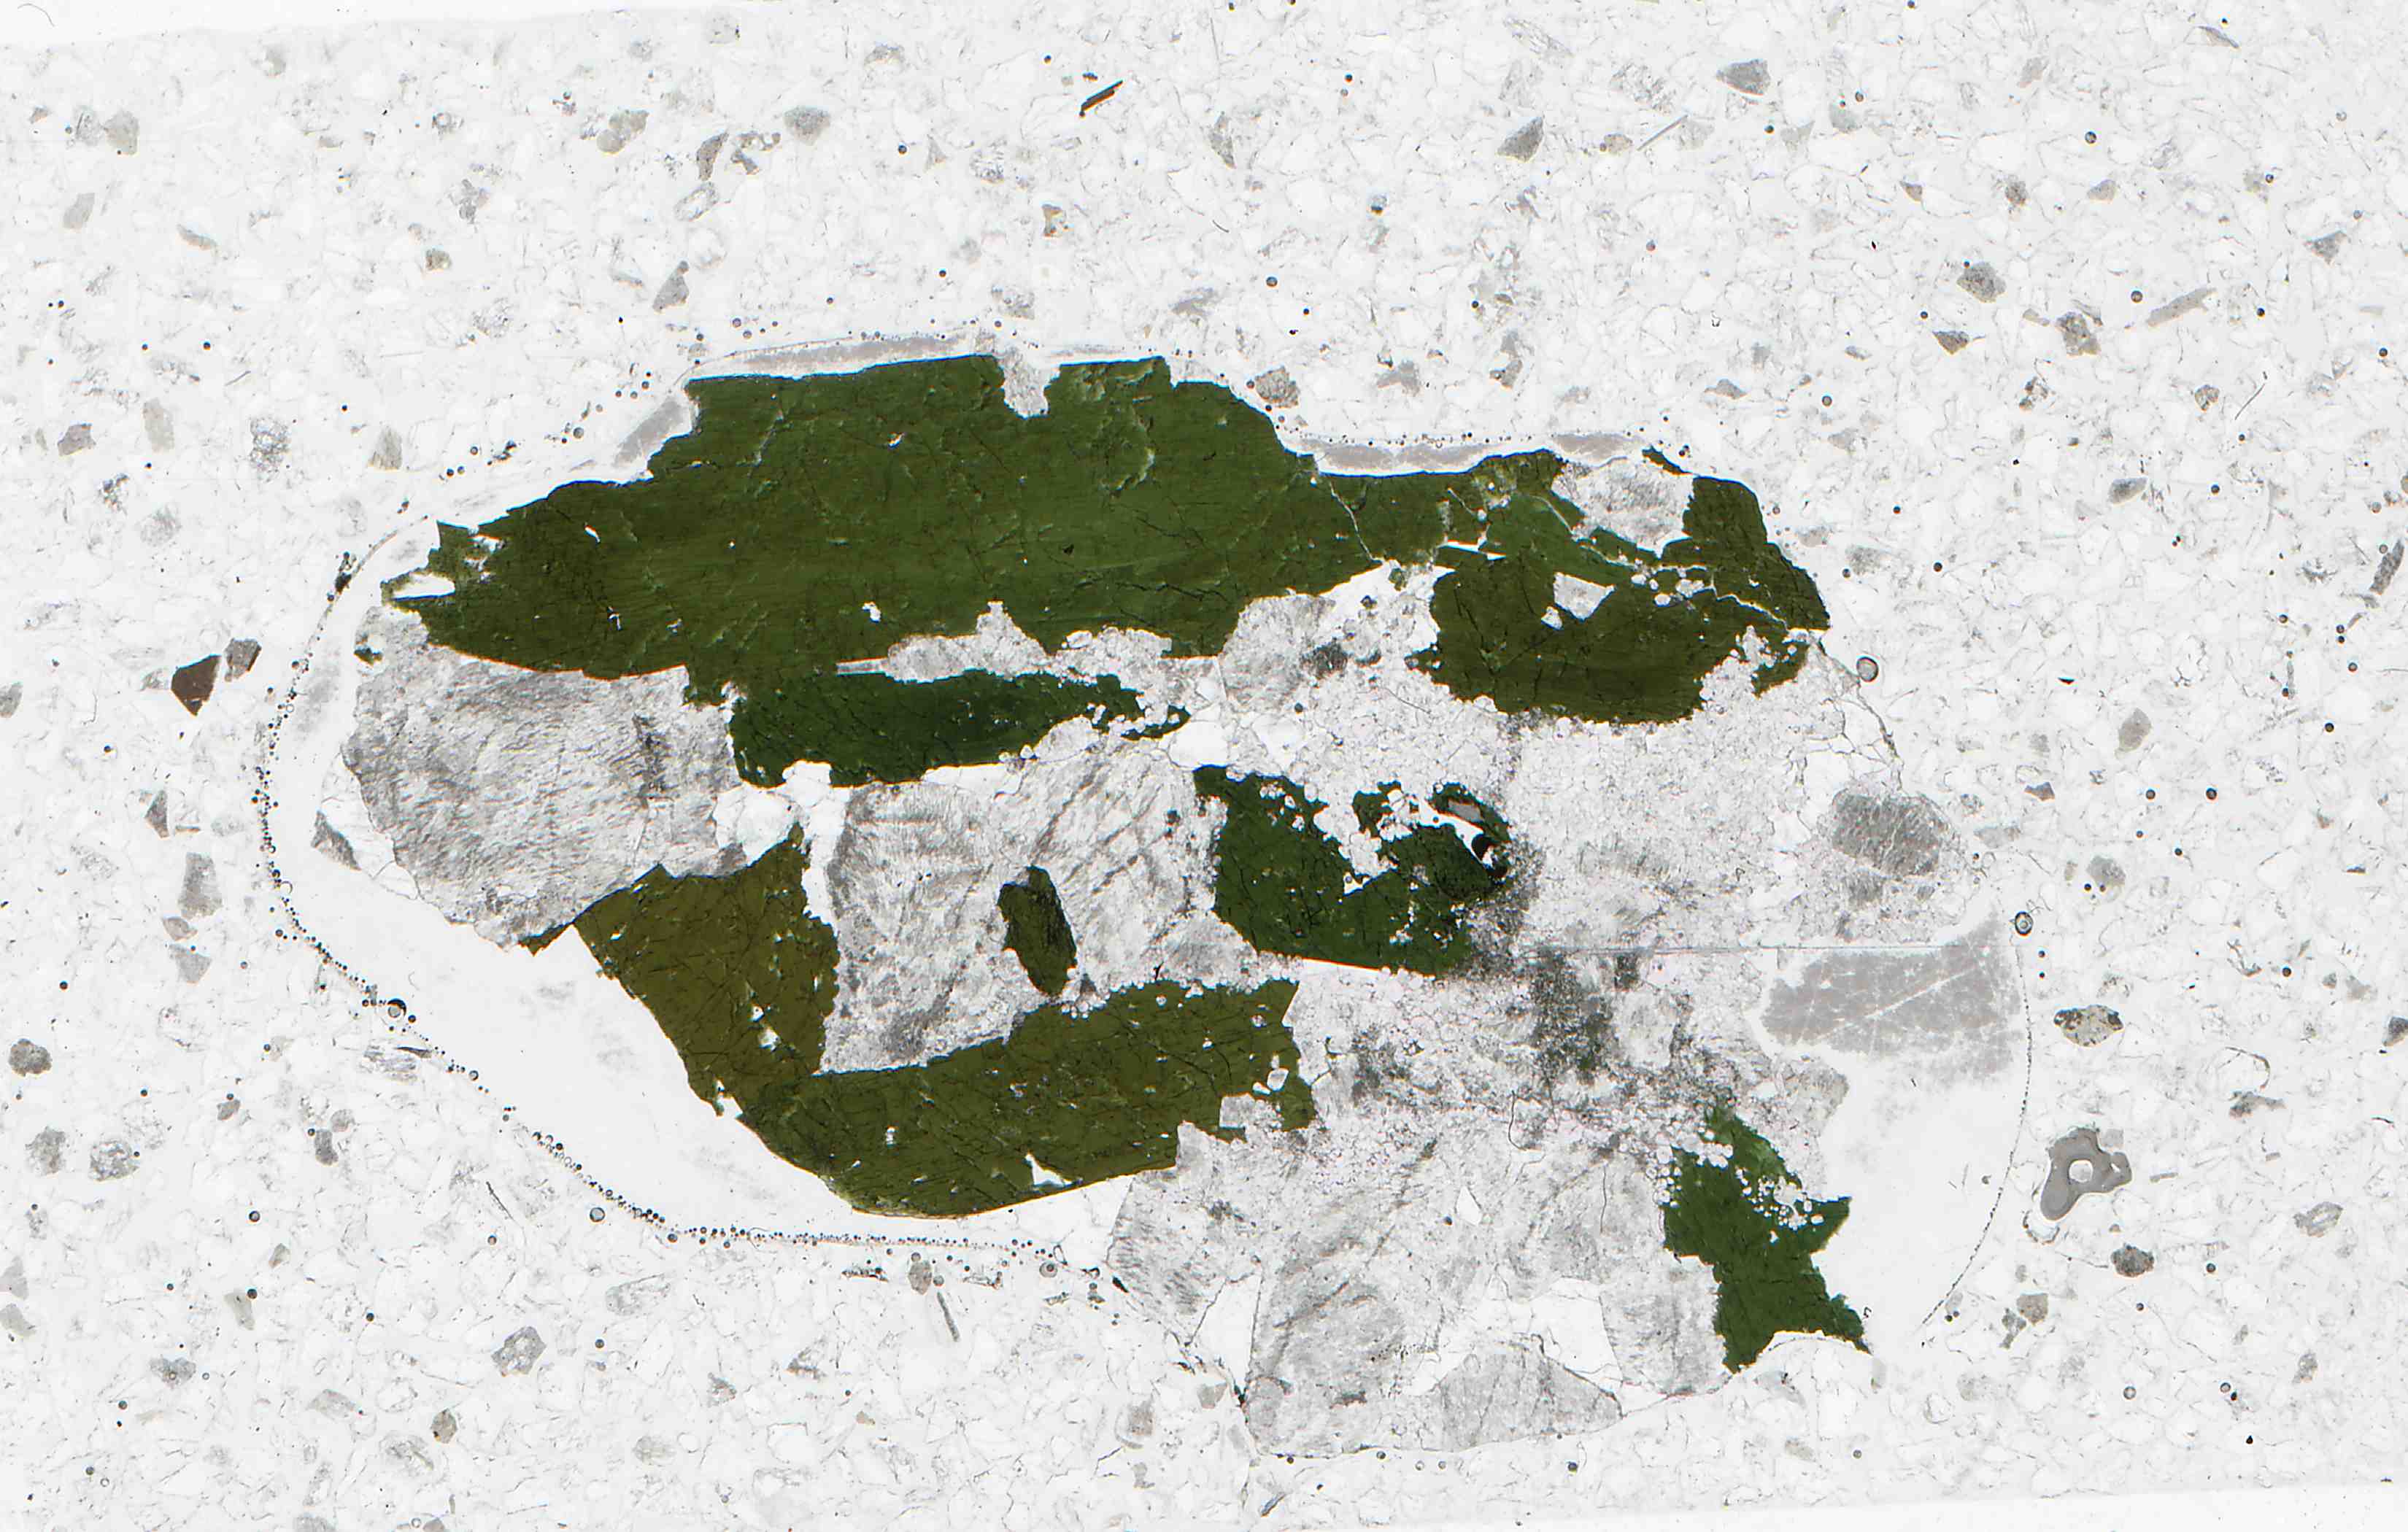 Alaska eudialyte in thin section